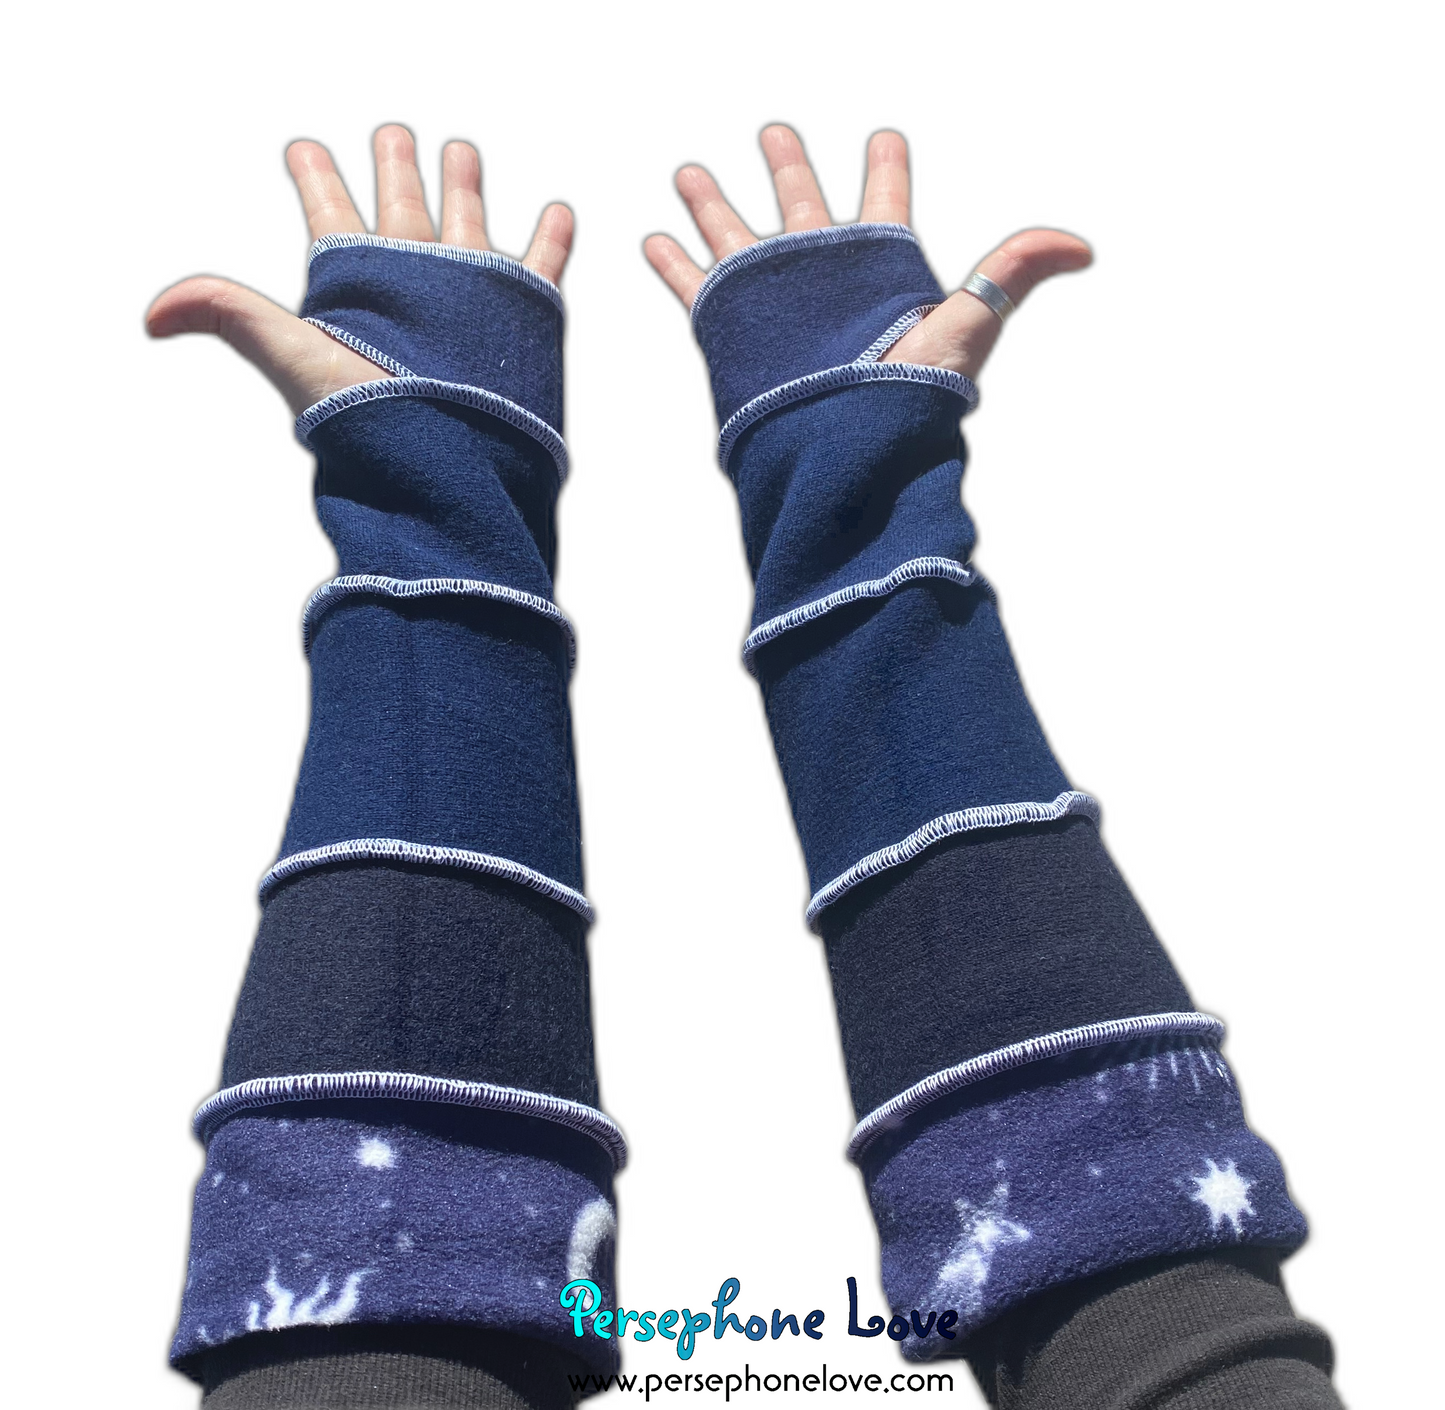 Katwise-inspired felted cashmere/merino arm warmers-1556